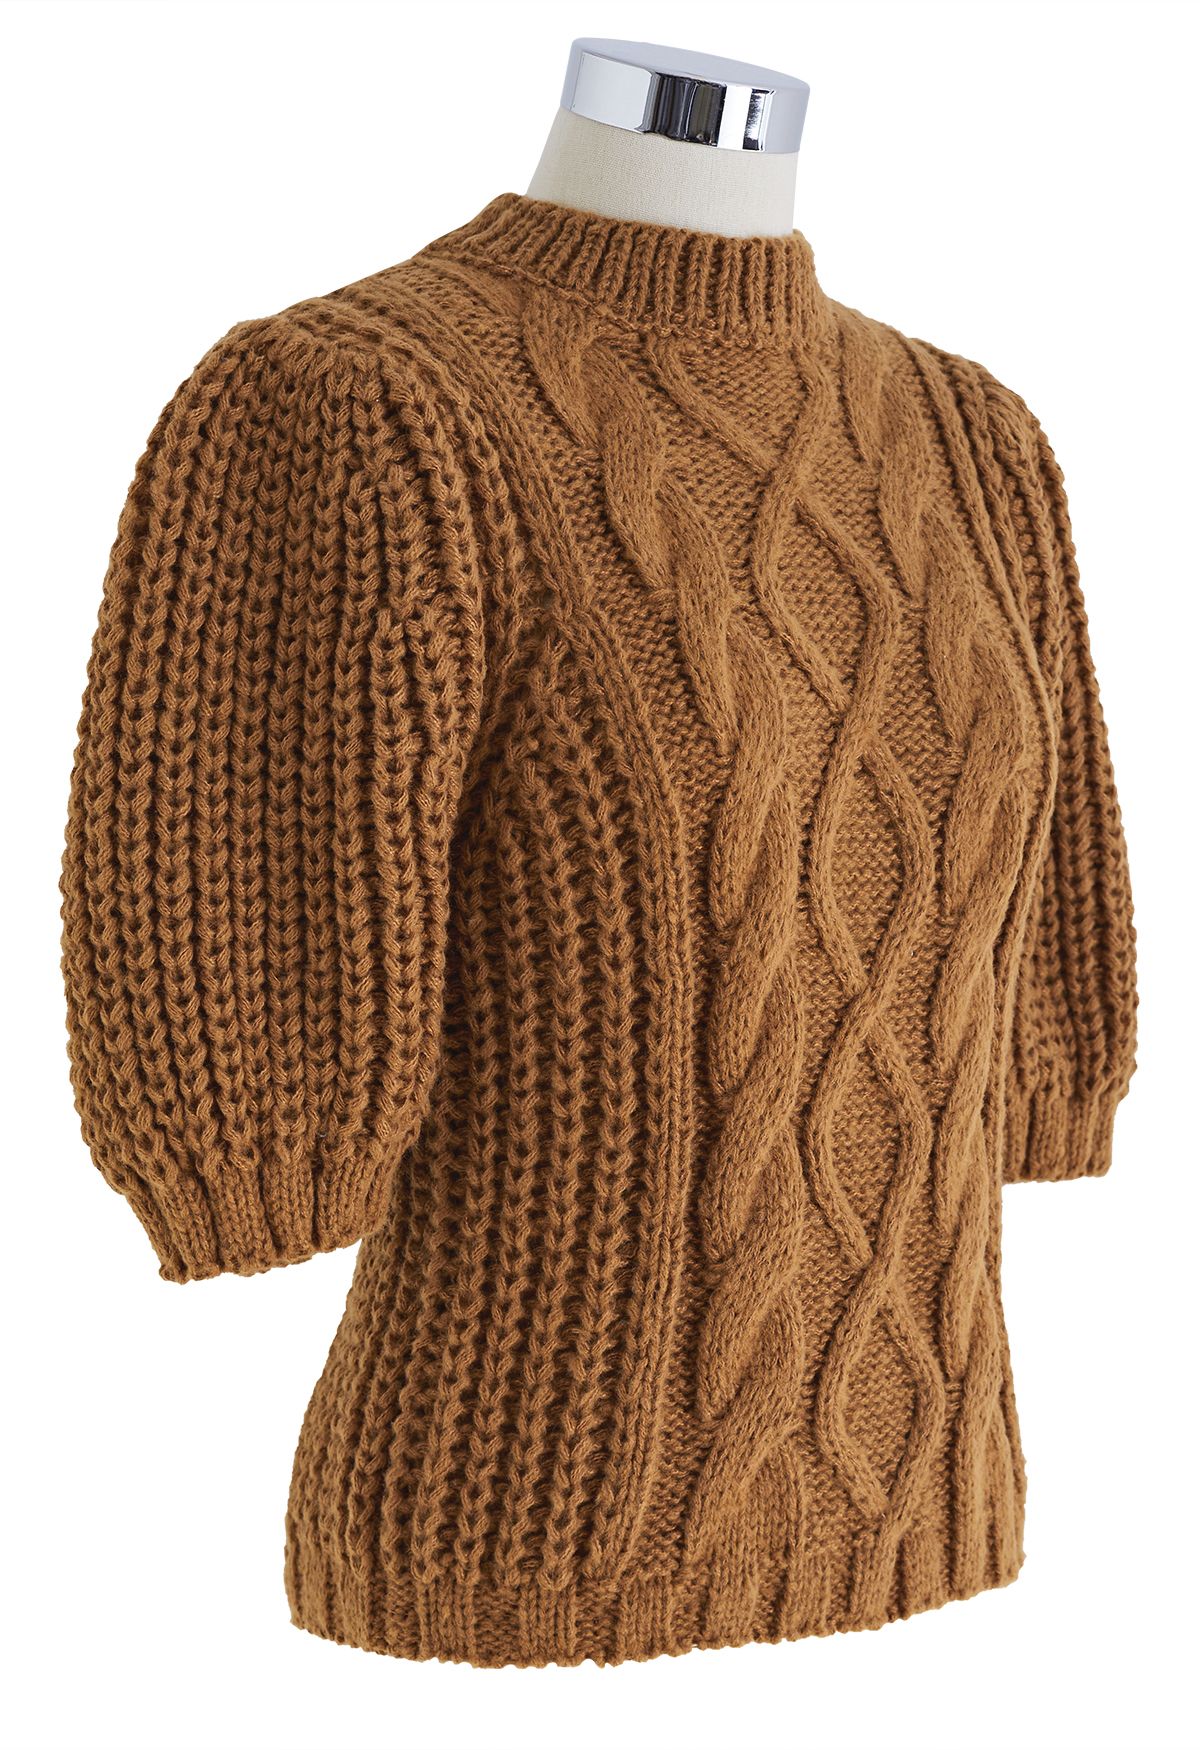 Bubble Sleeve Braided Ribbed Sweater in Tan - Retro, Indie and Unique ...